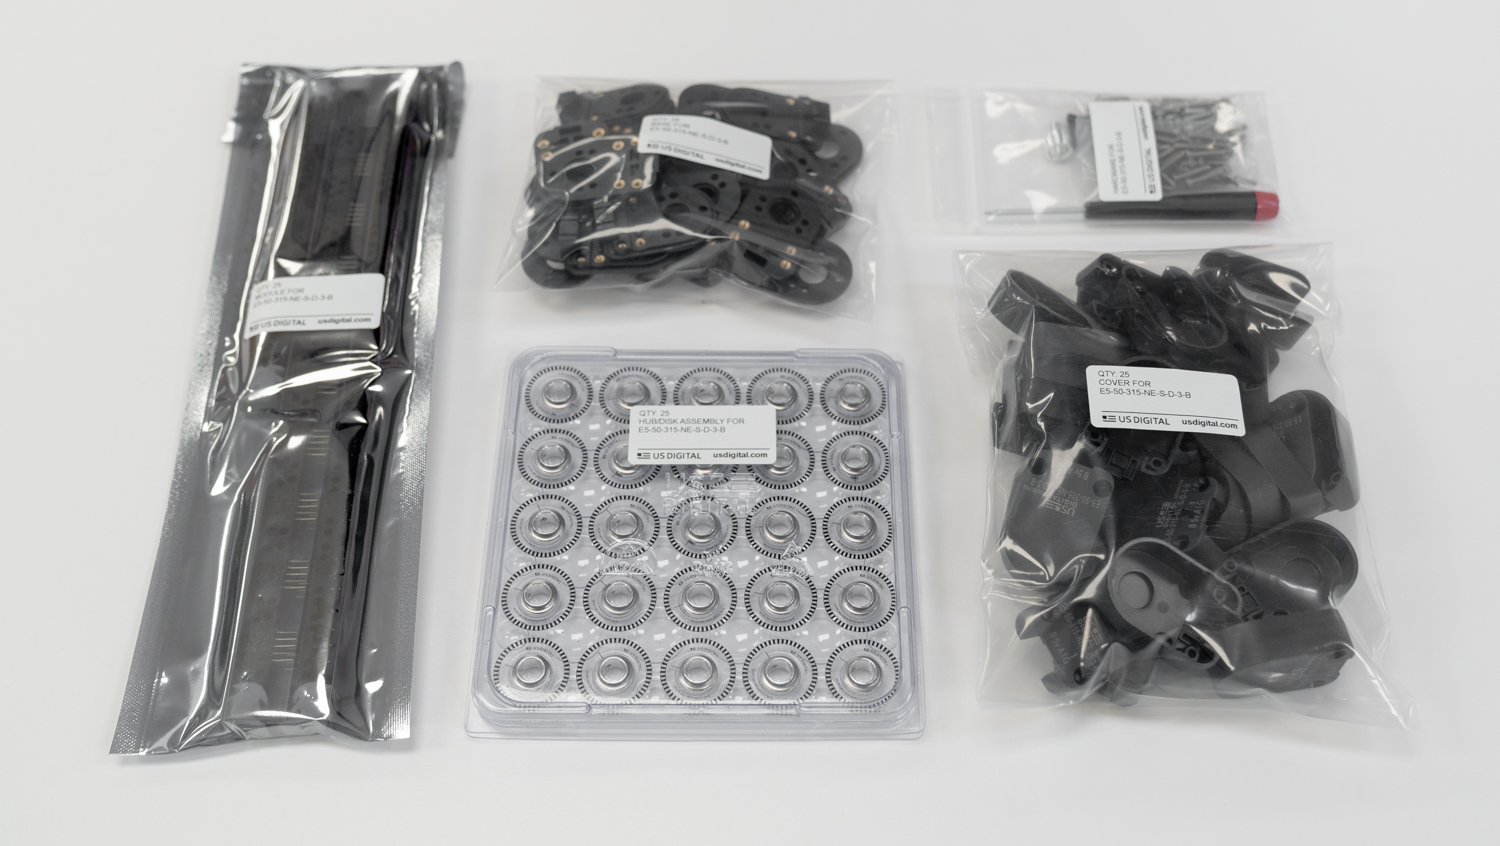 E5 encoder components in bulk packaging